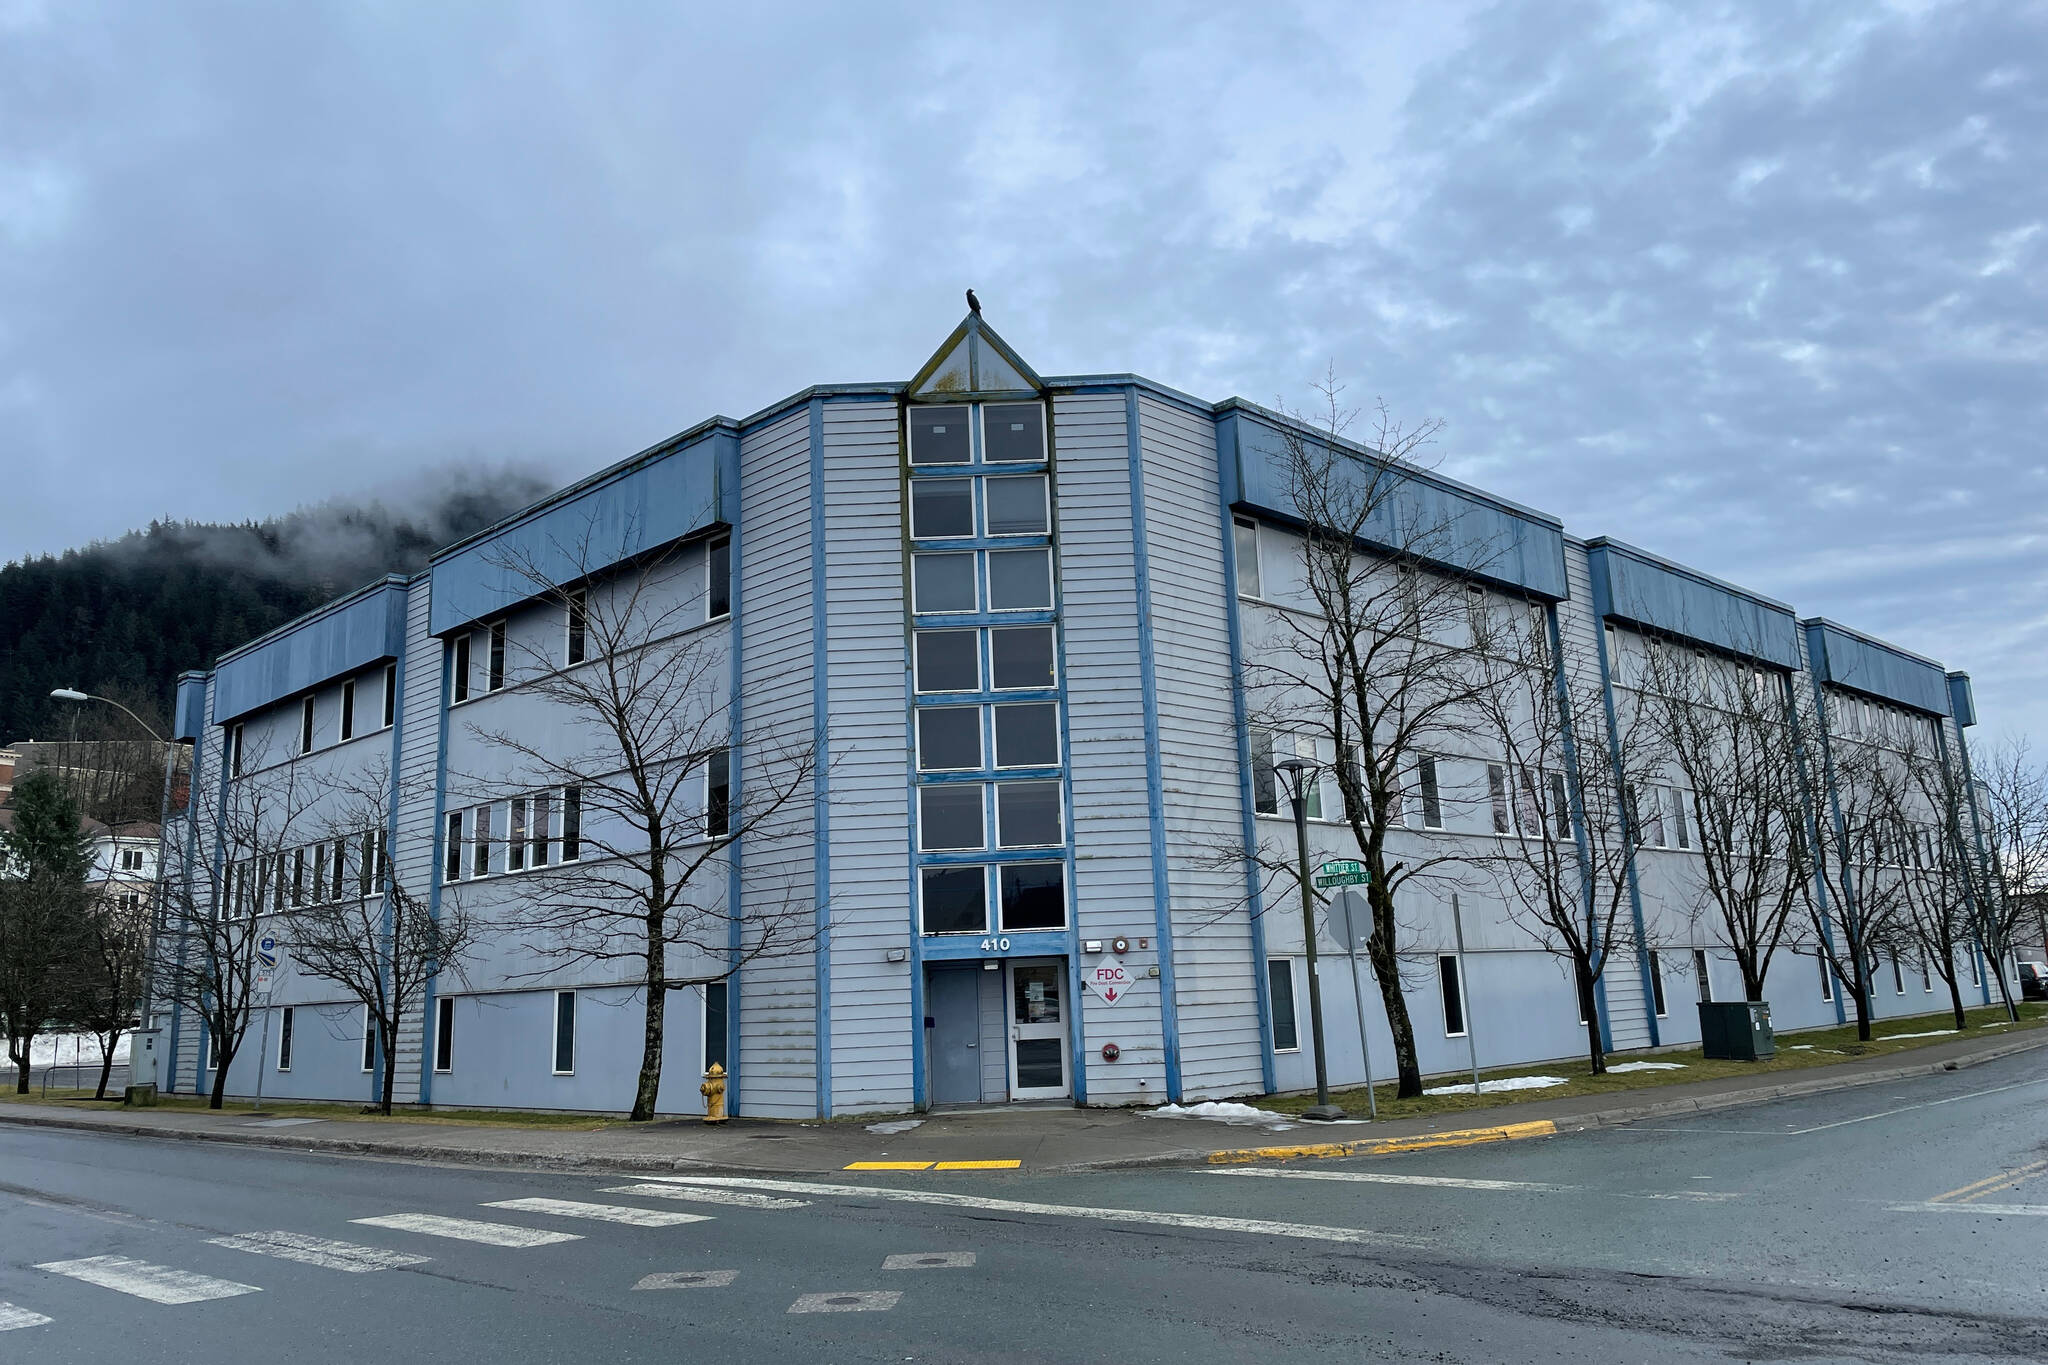 Michael S. Lockett / Juneau Empire 
Central Council of Tlingit and Haida Indian Tribes of Alaska recently acquired a pair of buildings downtown near the Andrew Hope Building as it hopes to provide more office space to centralize services for its citizens.